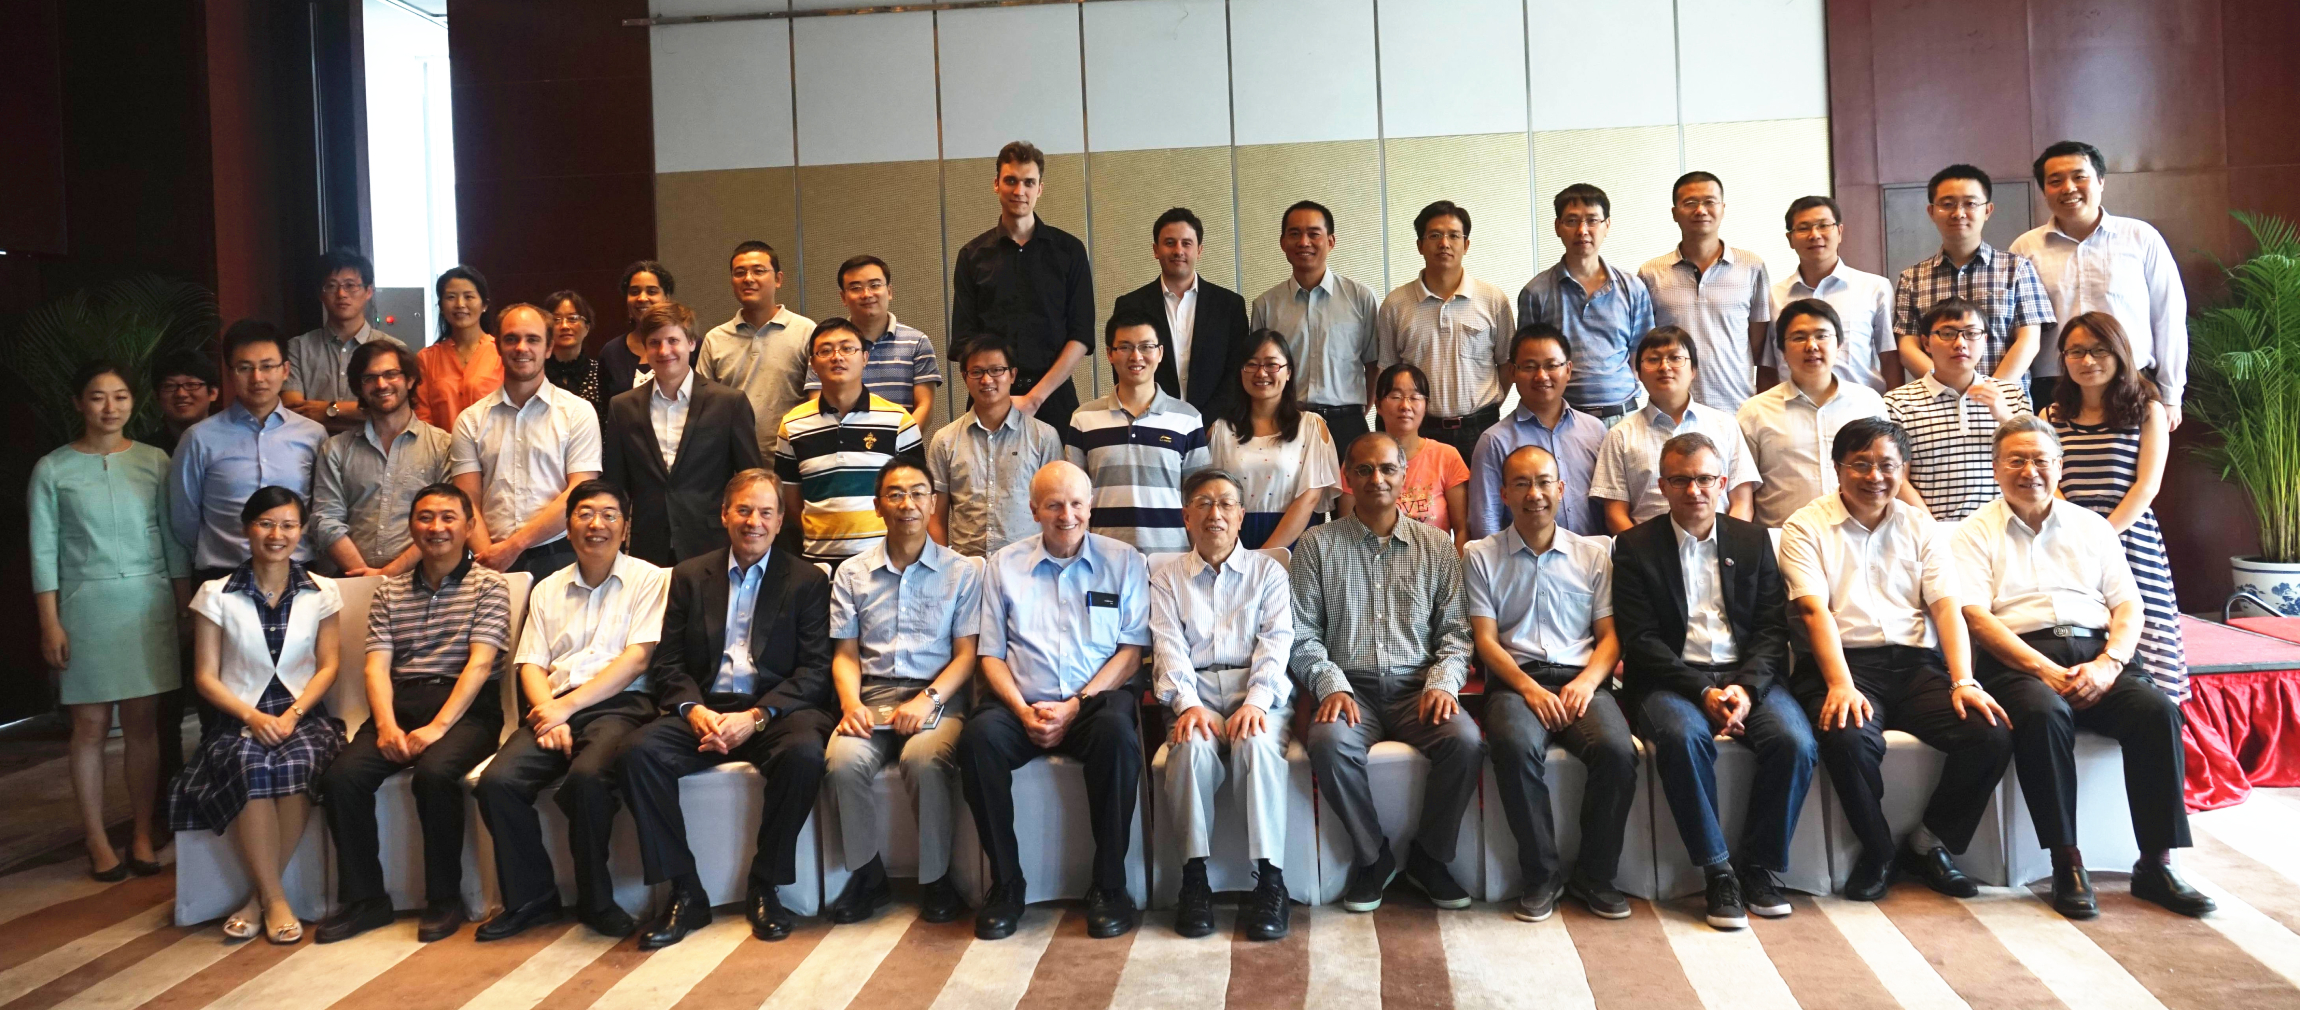 Participants at the disarmament verification workshop organized by the Program on Science and Global Security (SGS) and the Project on Verification Technologies and Science (PVTS) of the China Academy of Engineering Physics, Beijing, June 15–16, 2015.